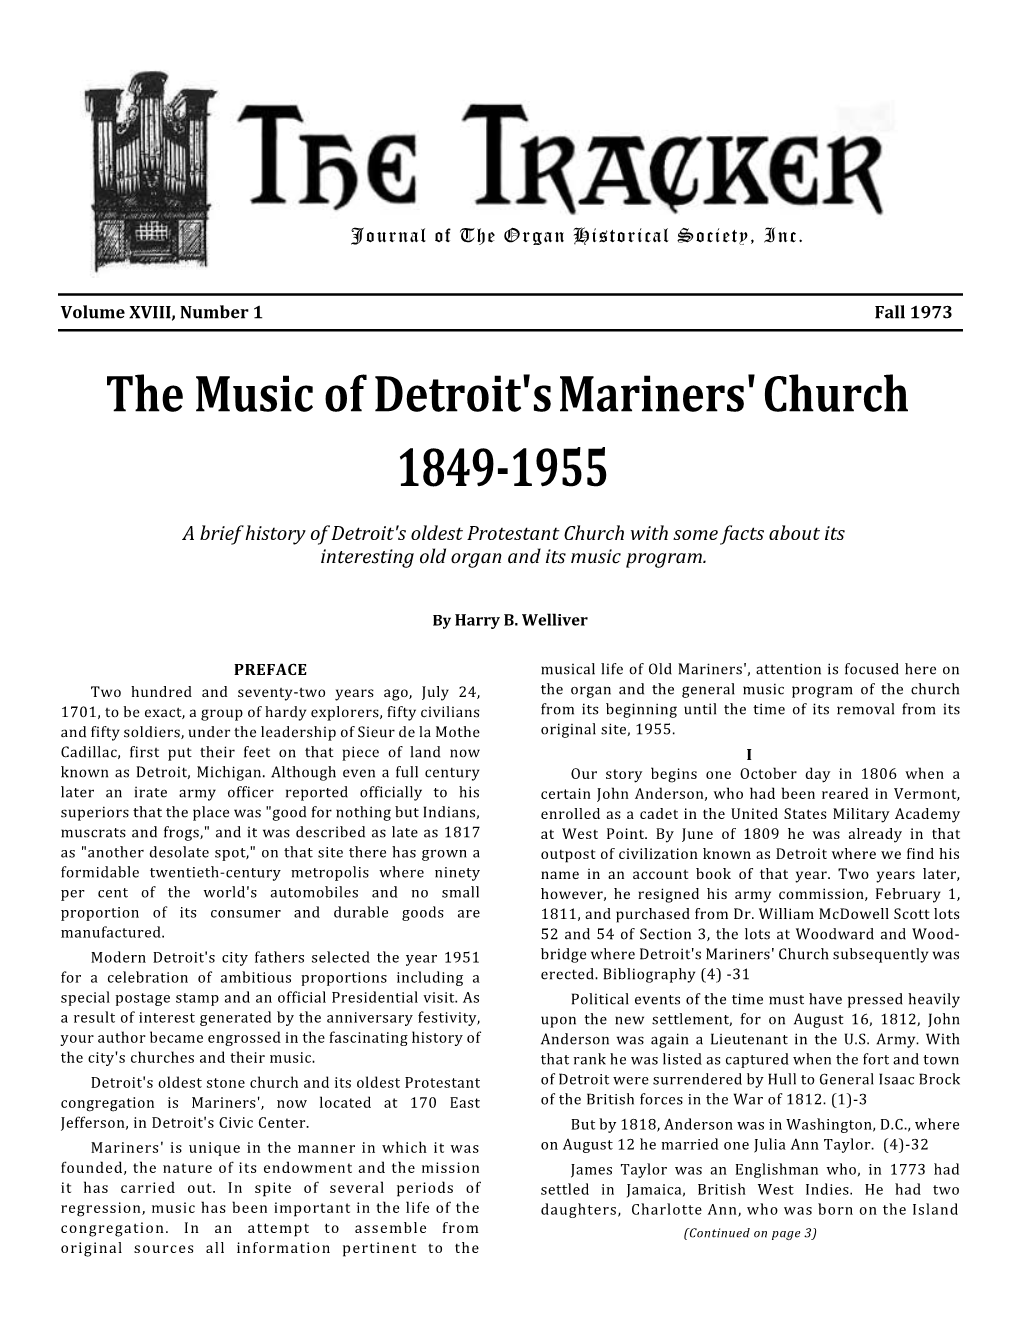 The Music of Detroit's Mariners' Church 1849‐1955